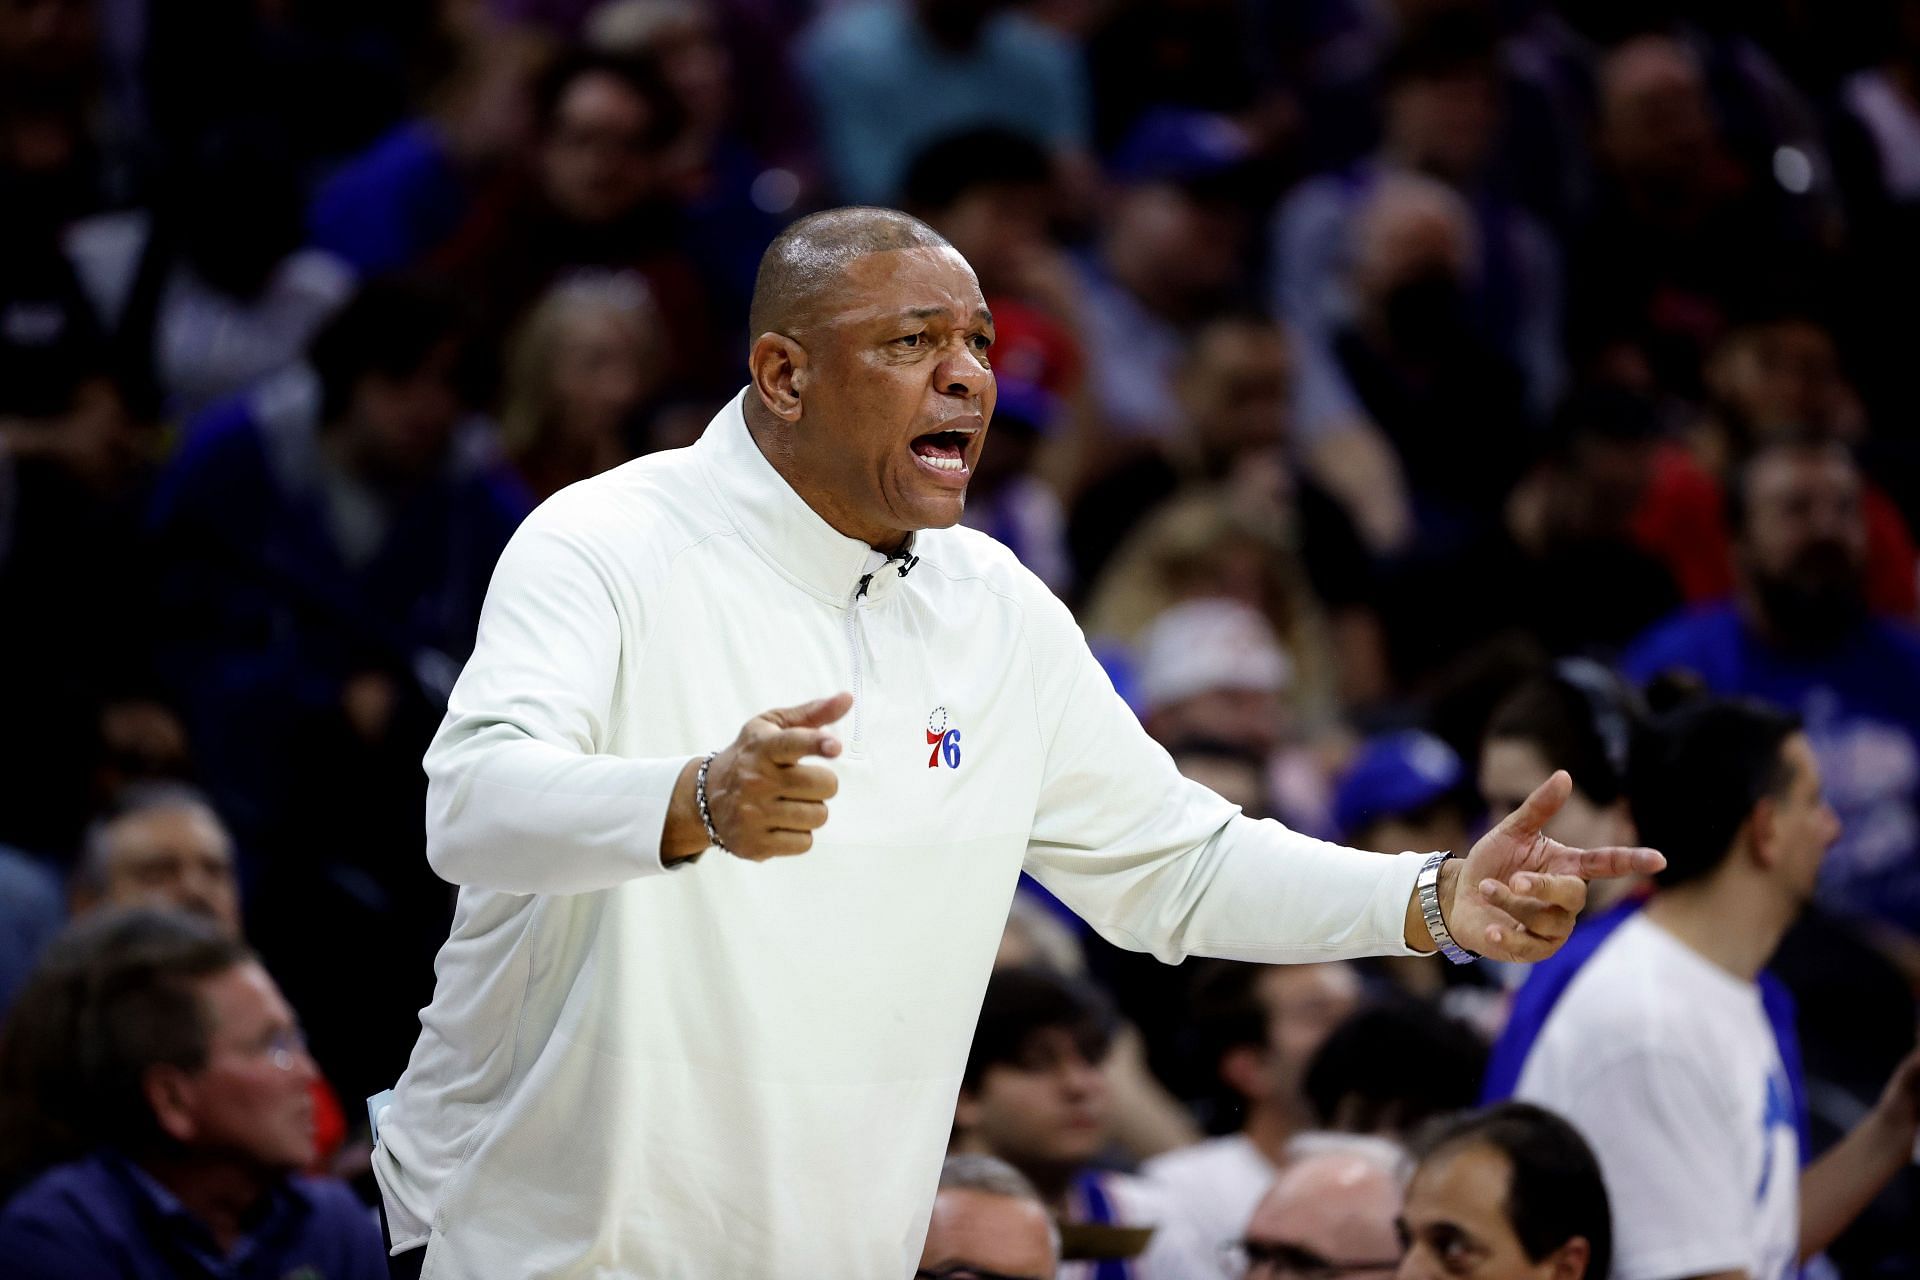 Despite the disappointing end to Philadelphia, the signs are that Doc Rivers will stay the course for the time being.